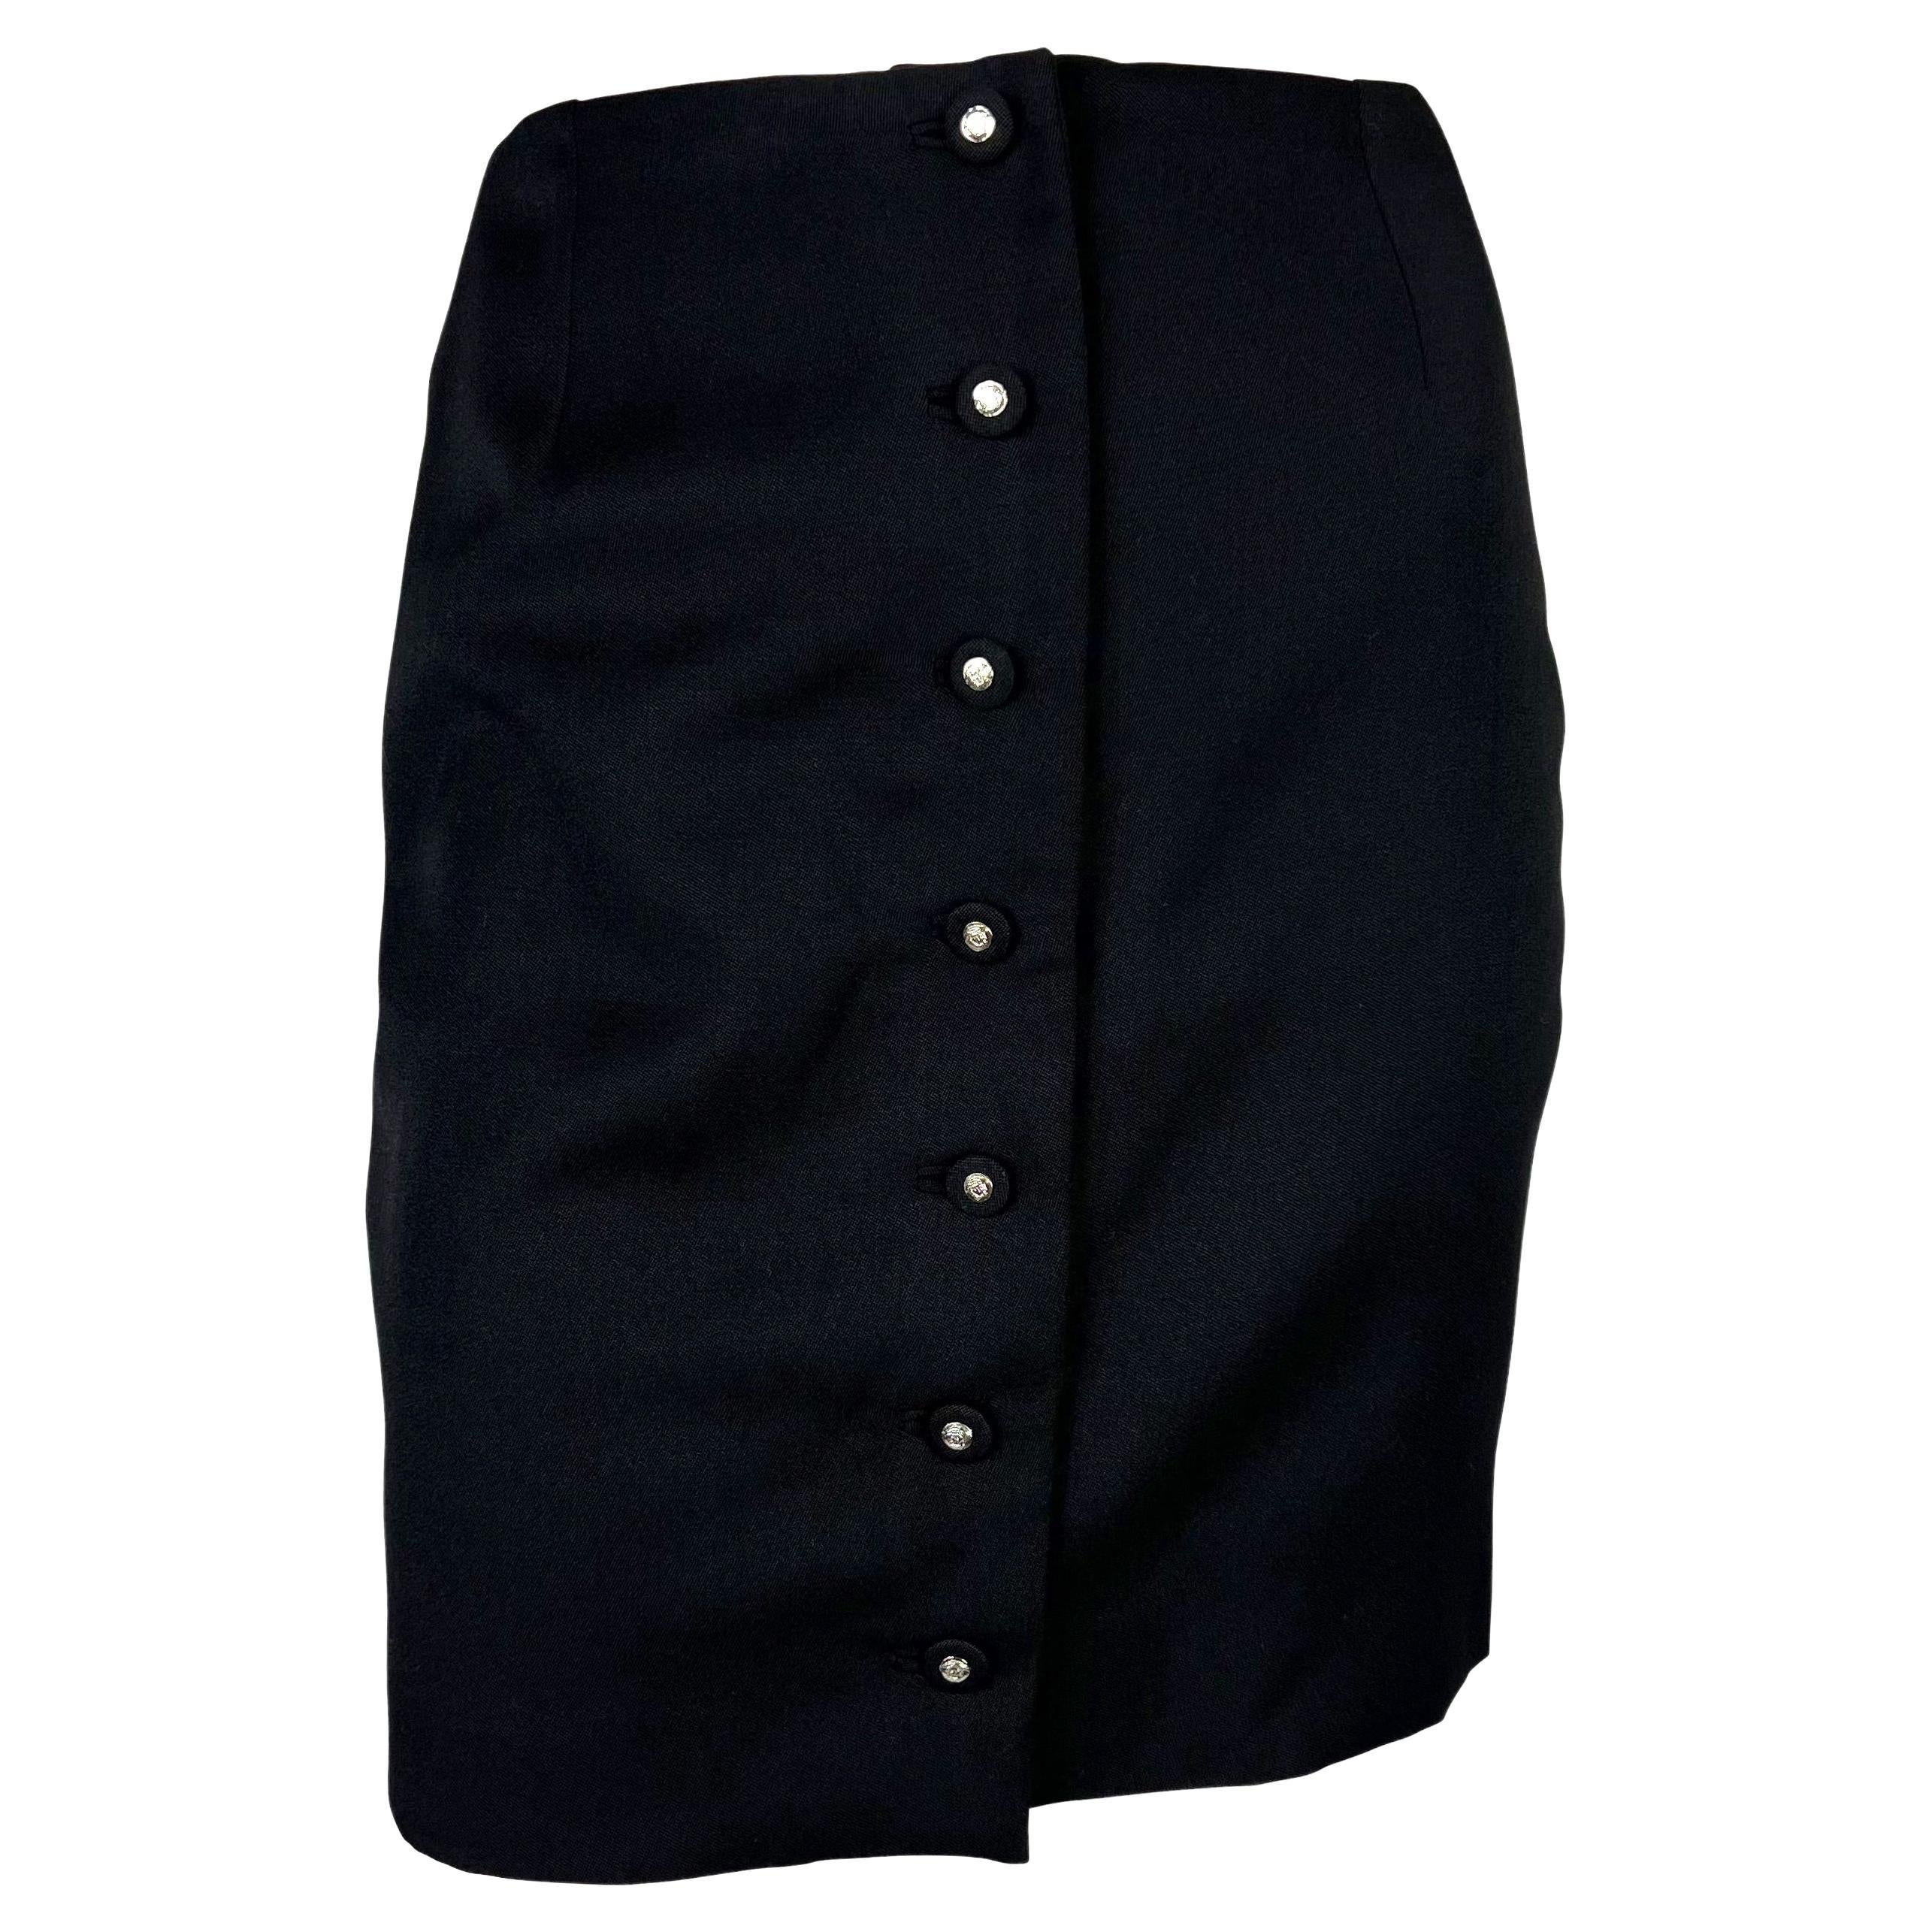 S/S 1996 Gianni Versace Couture Medusa Button Black Stretch Wool Mini Skirt For Sale